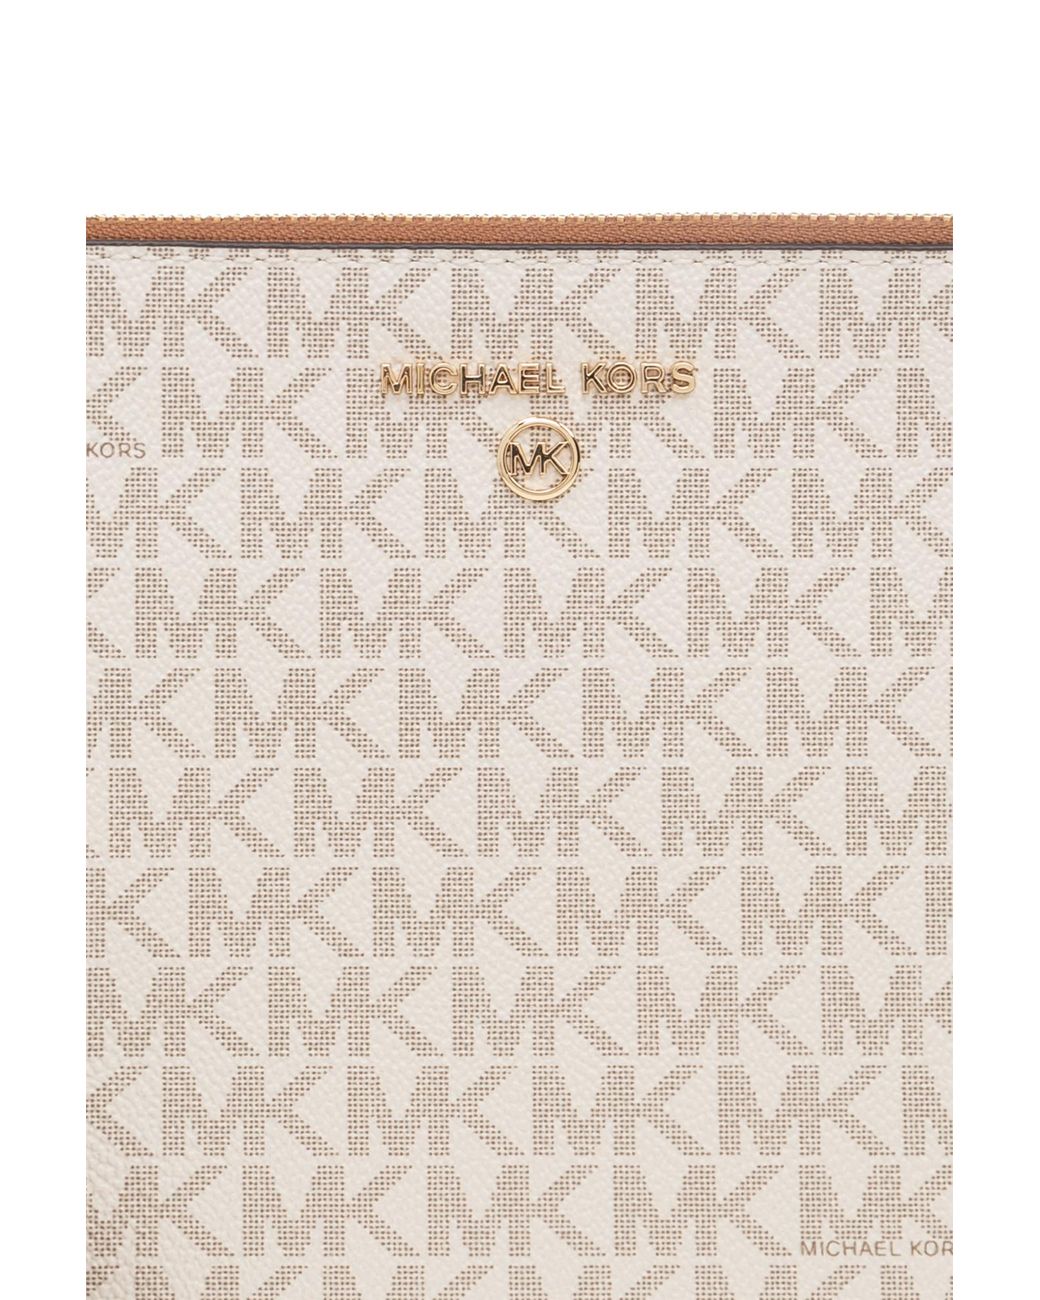 MICHAEL KORS SLATER BACKPACK IN HAMMERED LEATHER WITH GOLD CHAIN Woman  Cream